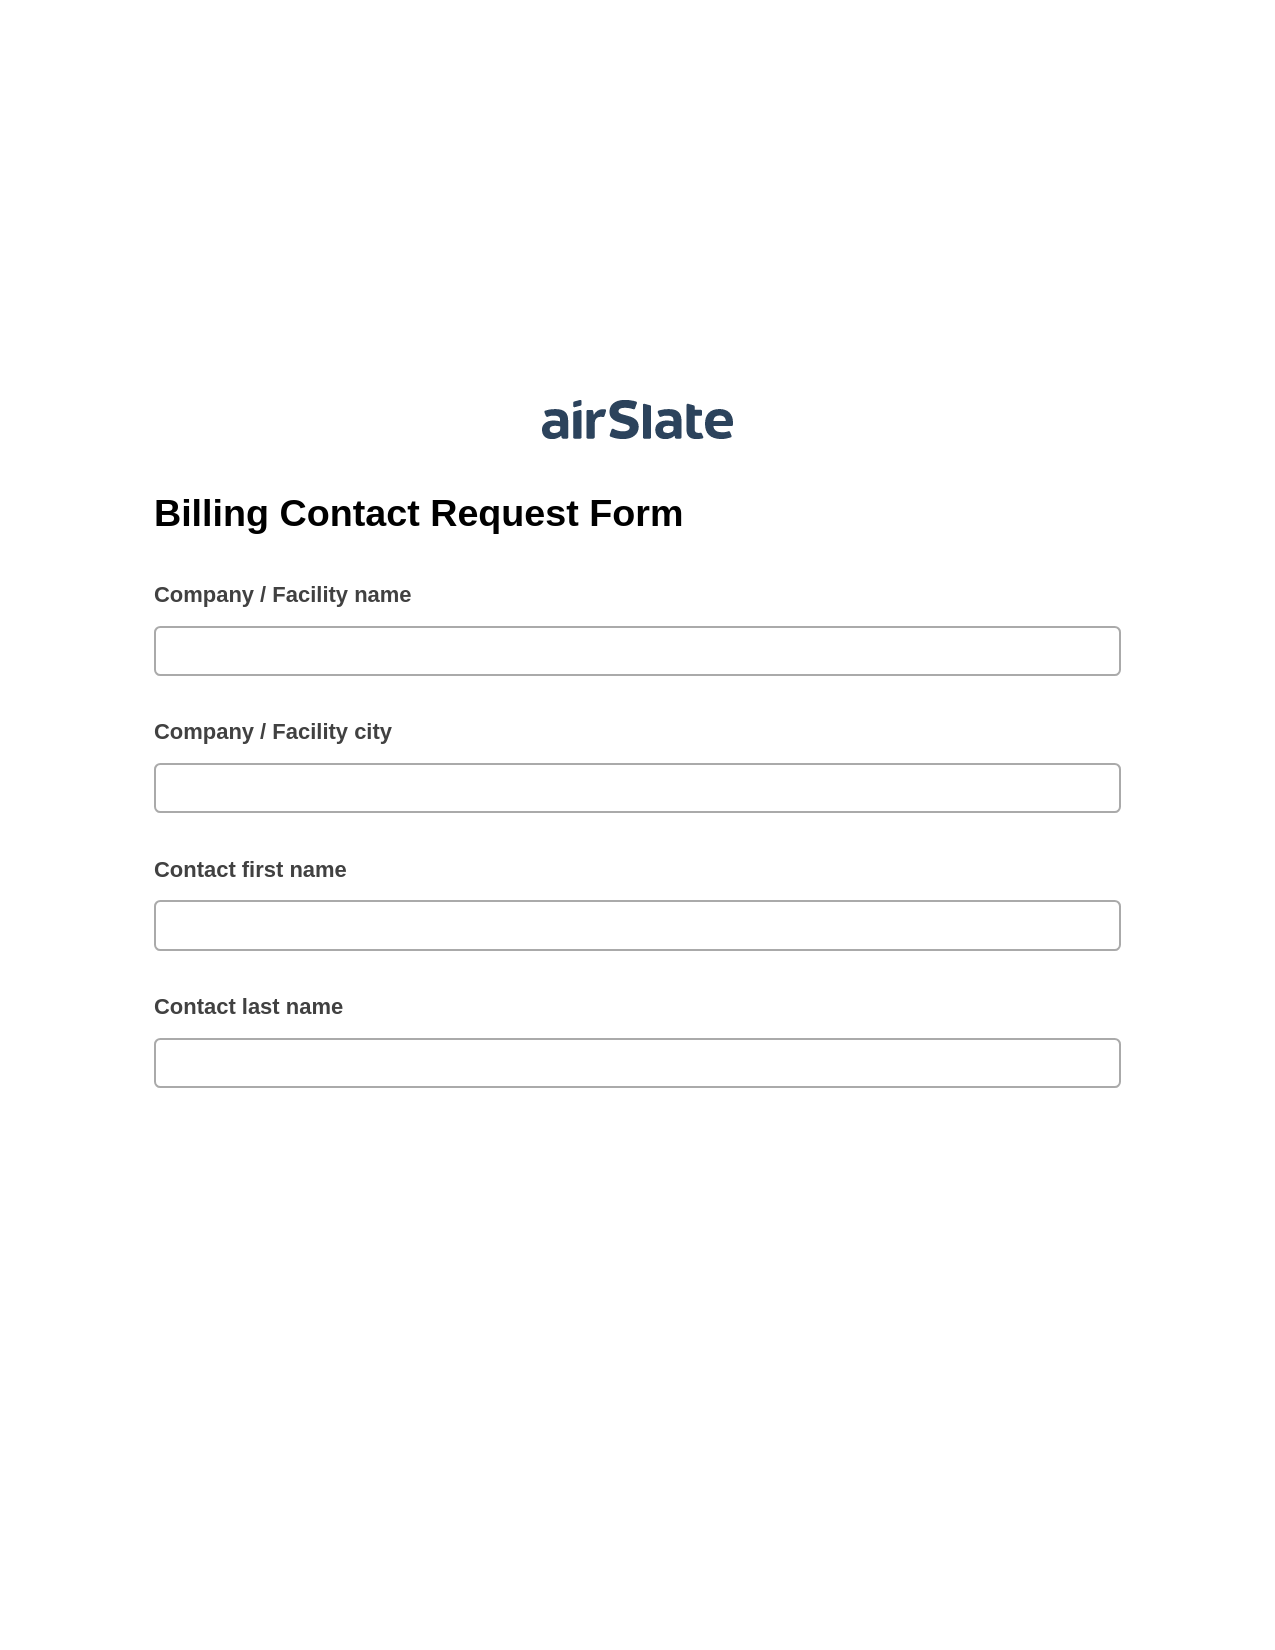 Multirole Billing Contact Request Form Pre-fill Slate from MS Dynamics 365 Records Bot, Create MS Dynamics 365 Records Bot, Archive to SharePoint Folder Bot